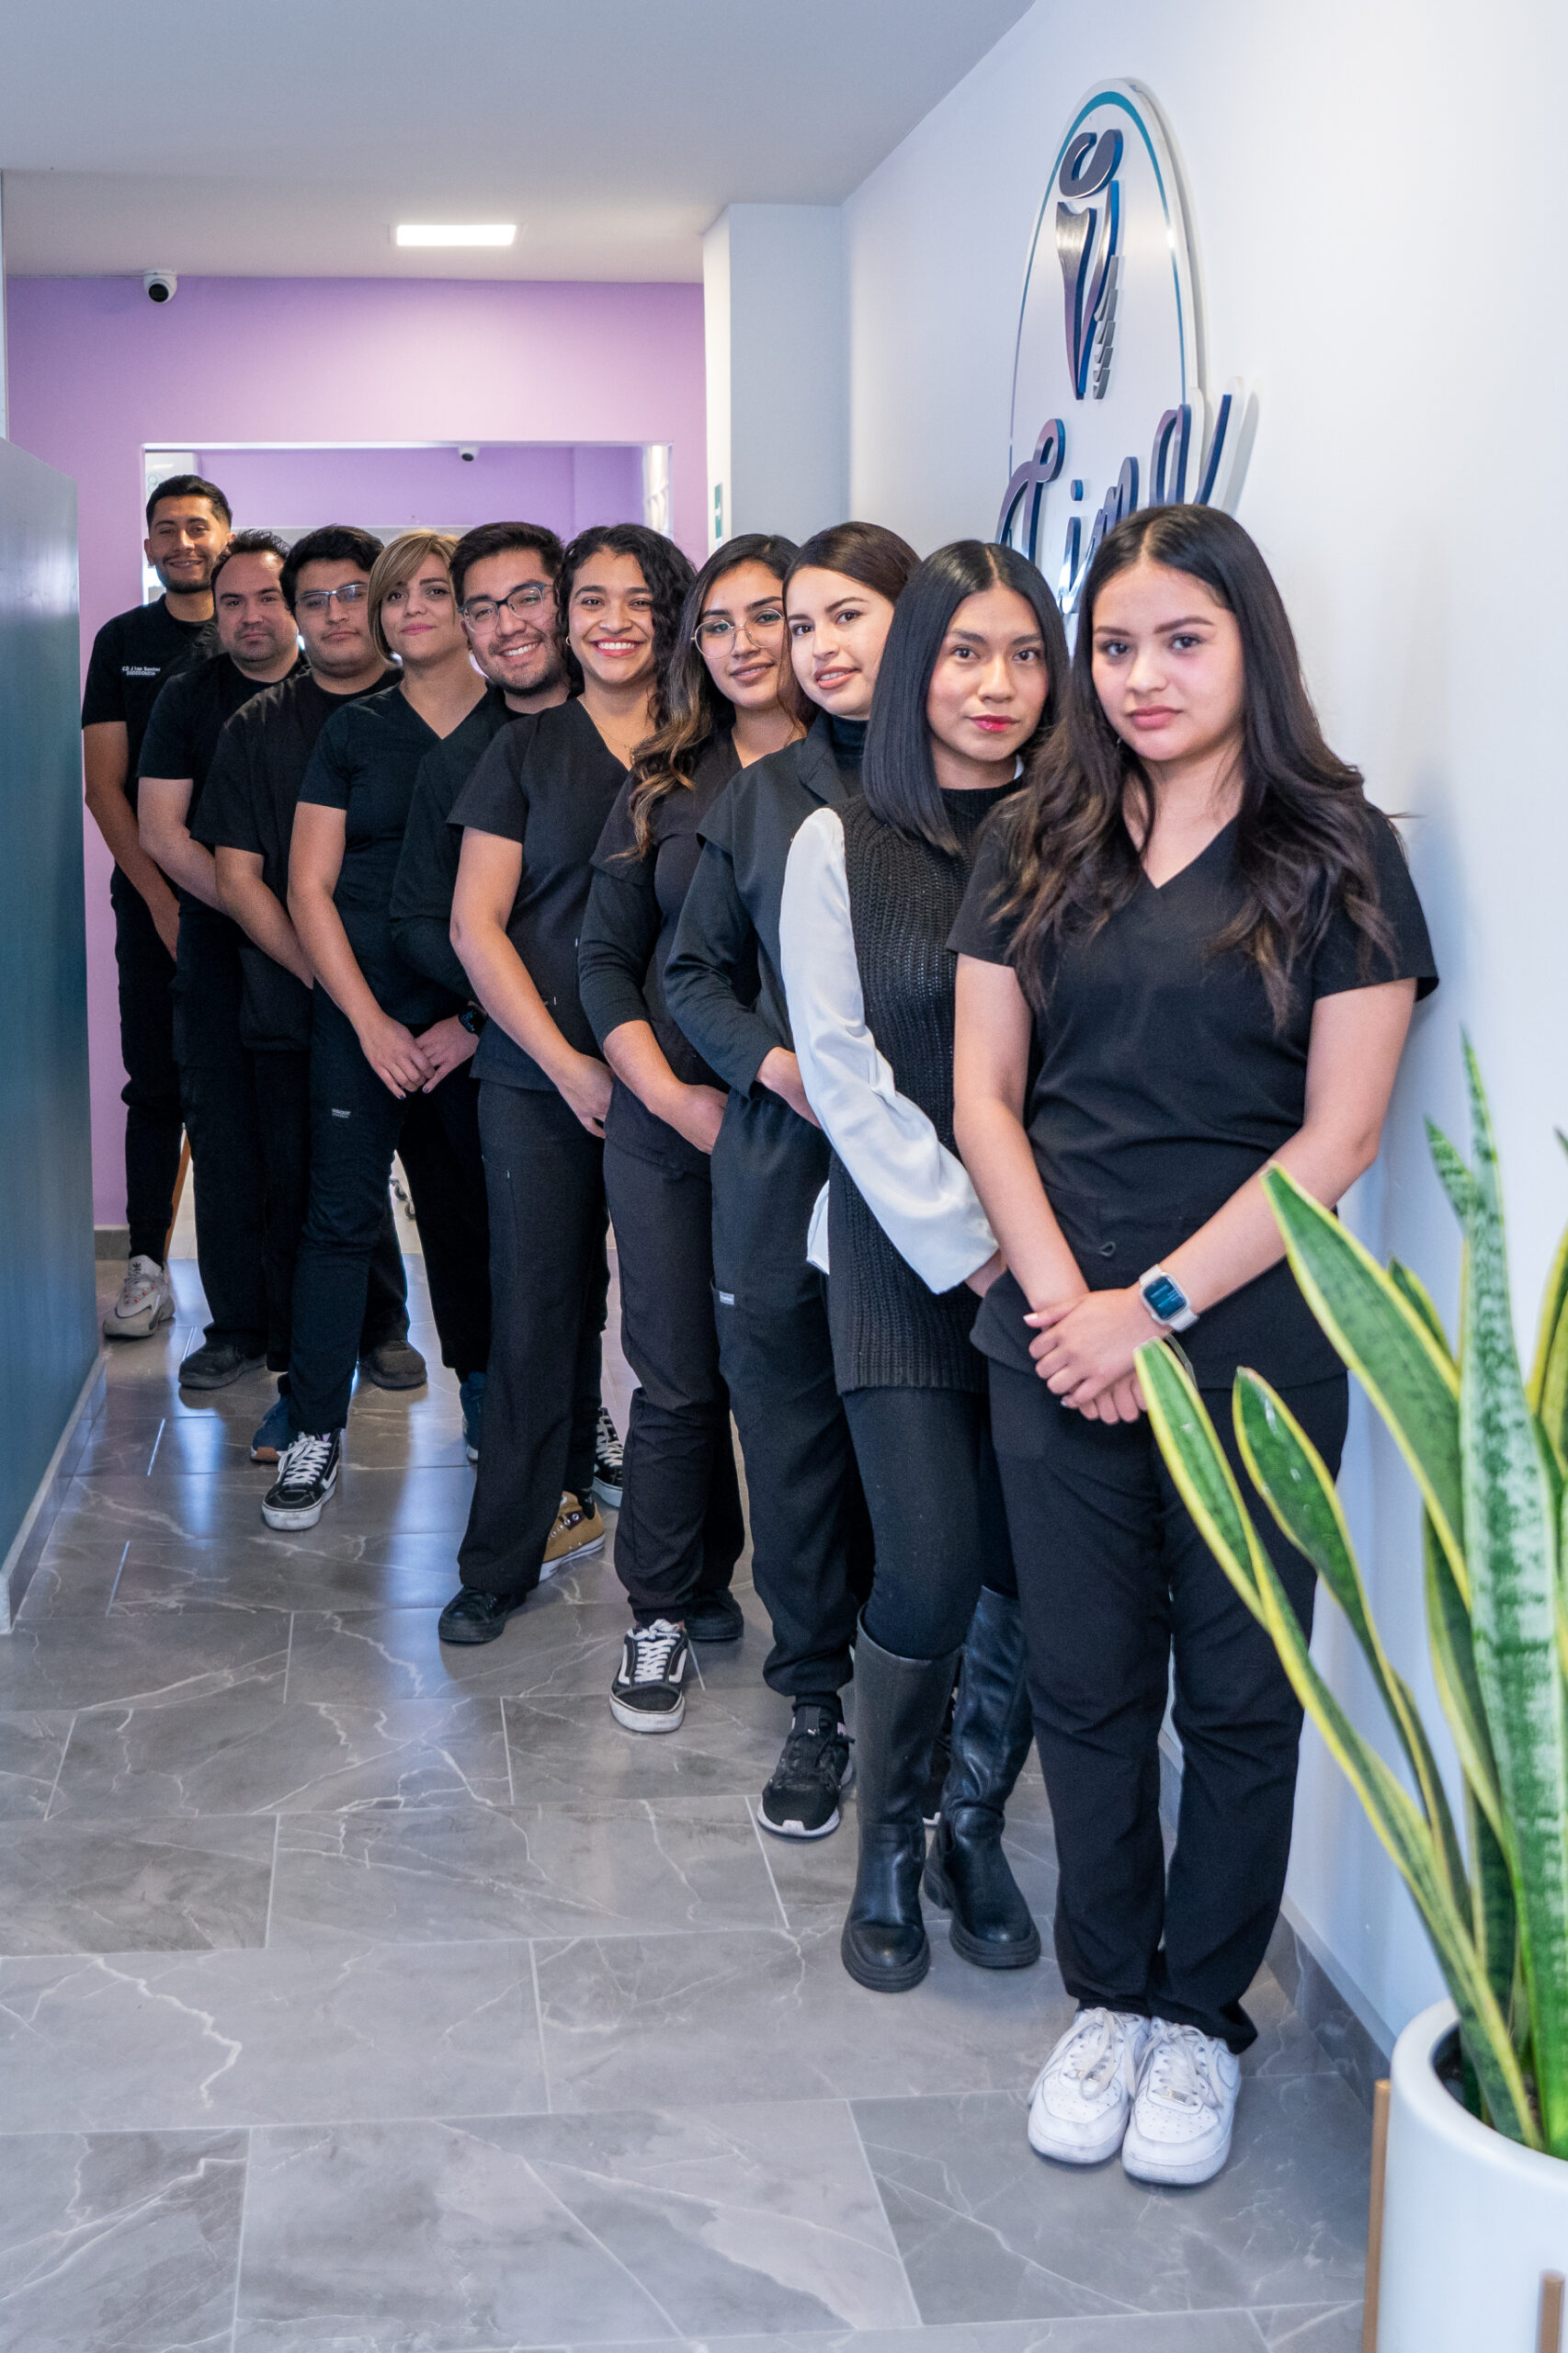 CIMA is an affordable Dental Surgery Clinic Tijuana with top quality and affordable services for your family’s dental care needs